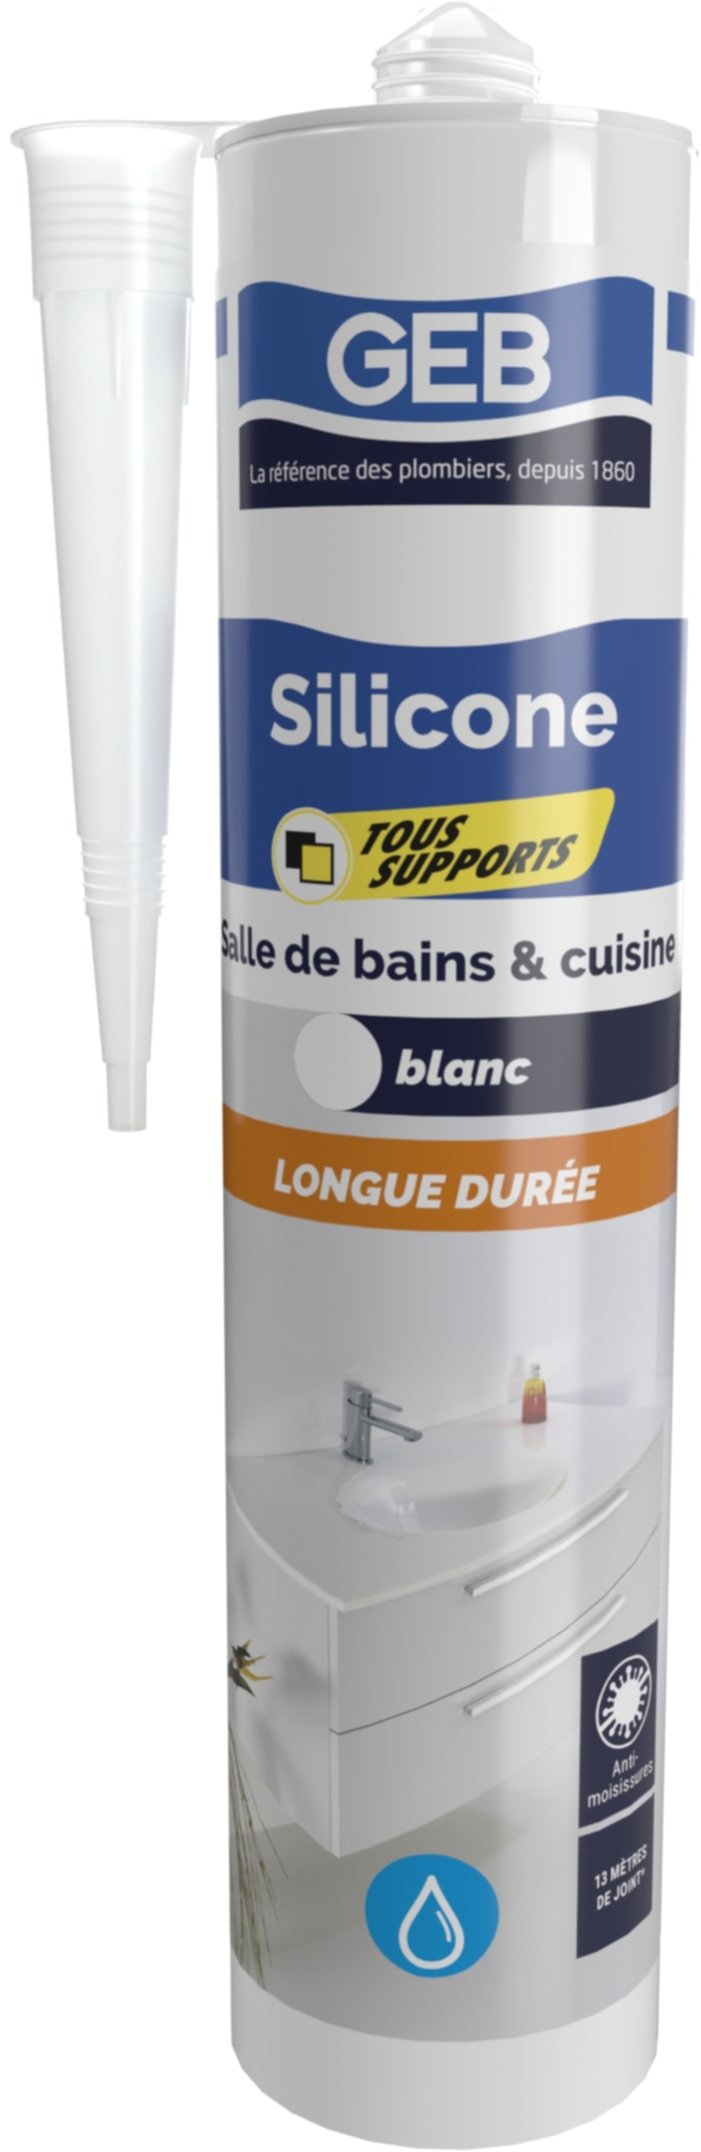 SILICONE TOUS SUPPORTS  blanc cart 280 ml